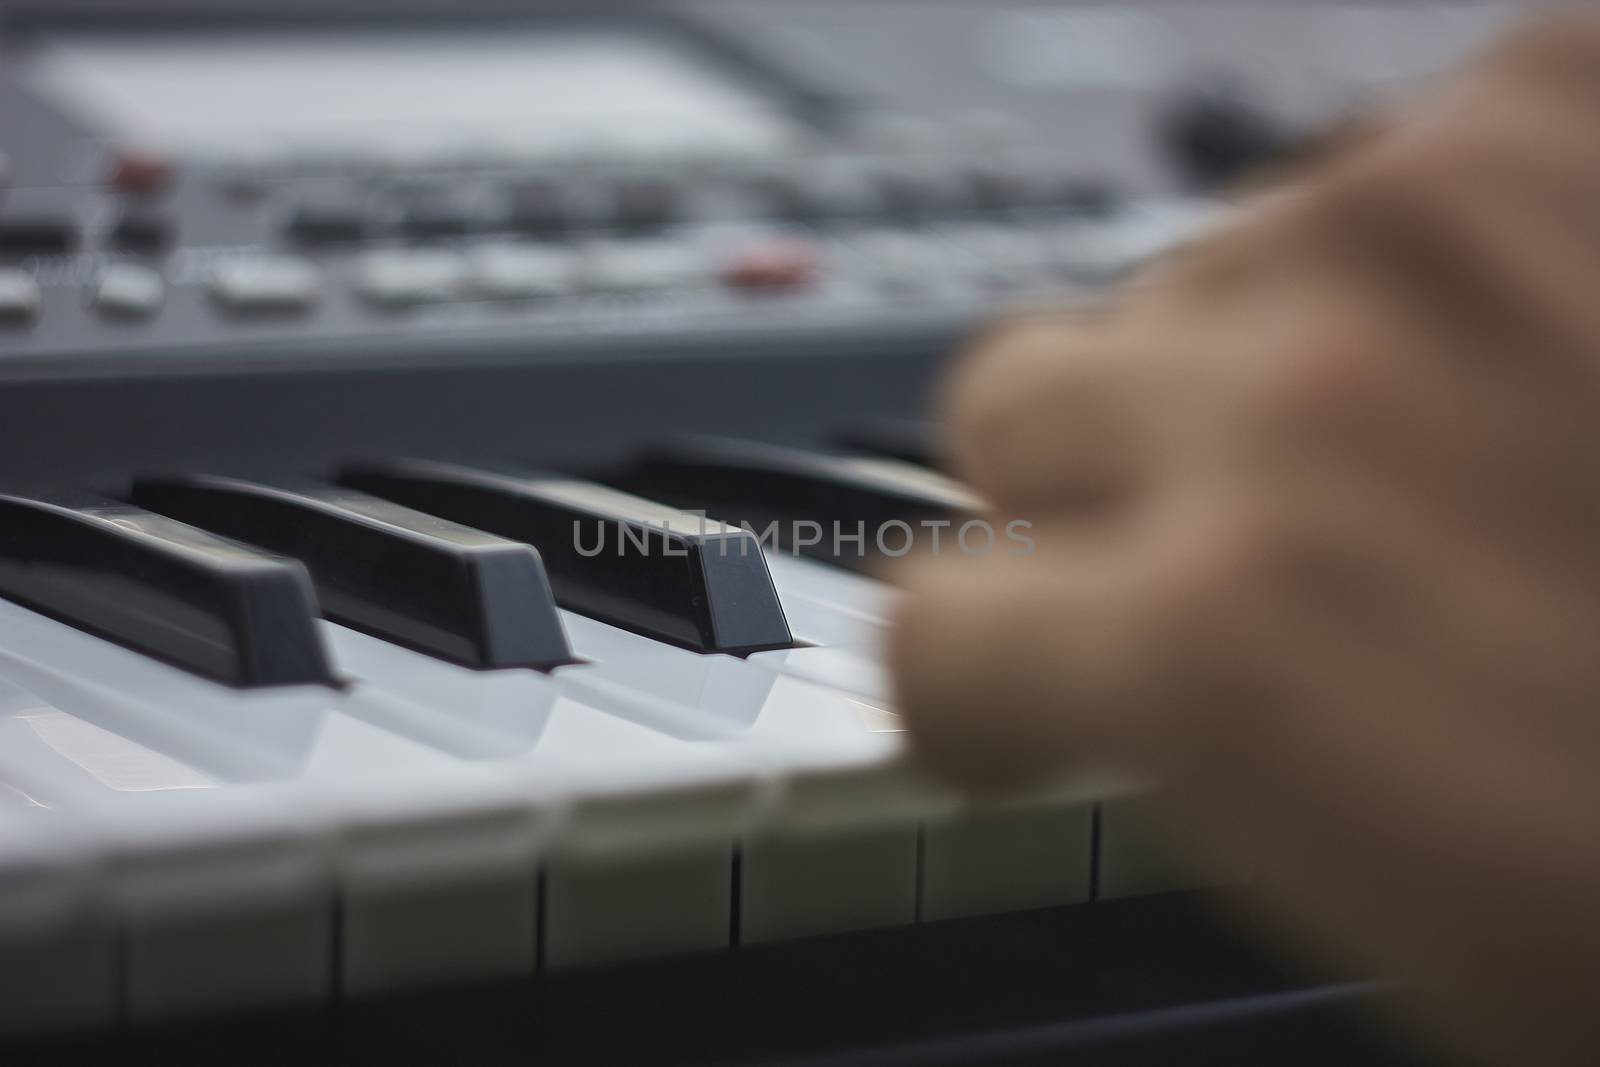 Detail of the keys of a music keyboard while playing live at a concert.